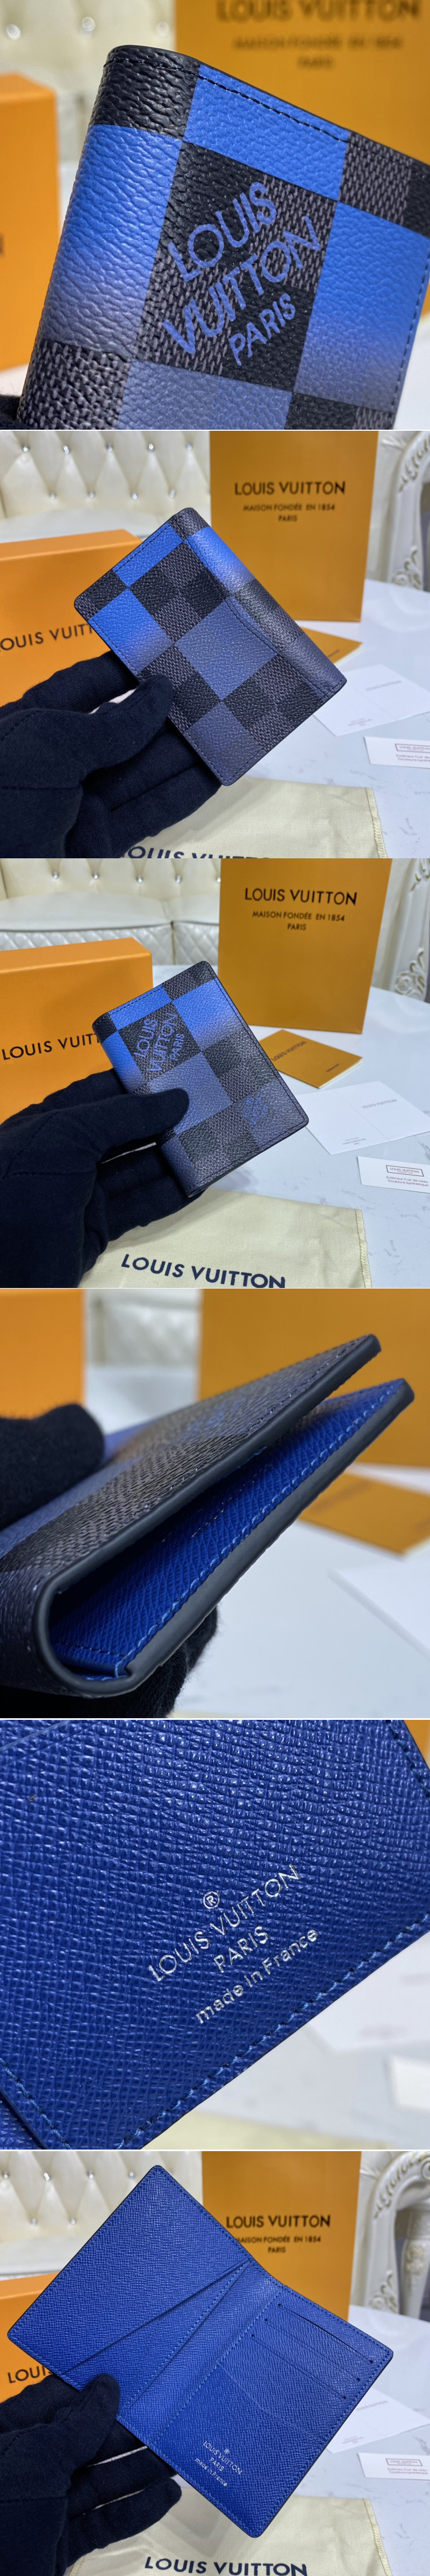 Products By Louis Vuitton: Lvxnba Pocket Organiser Wallet